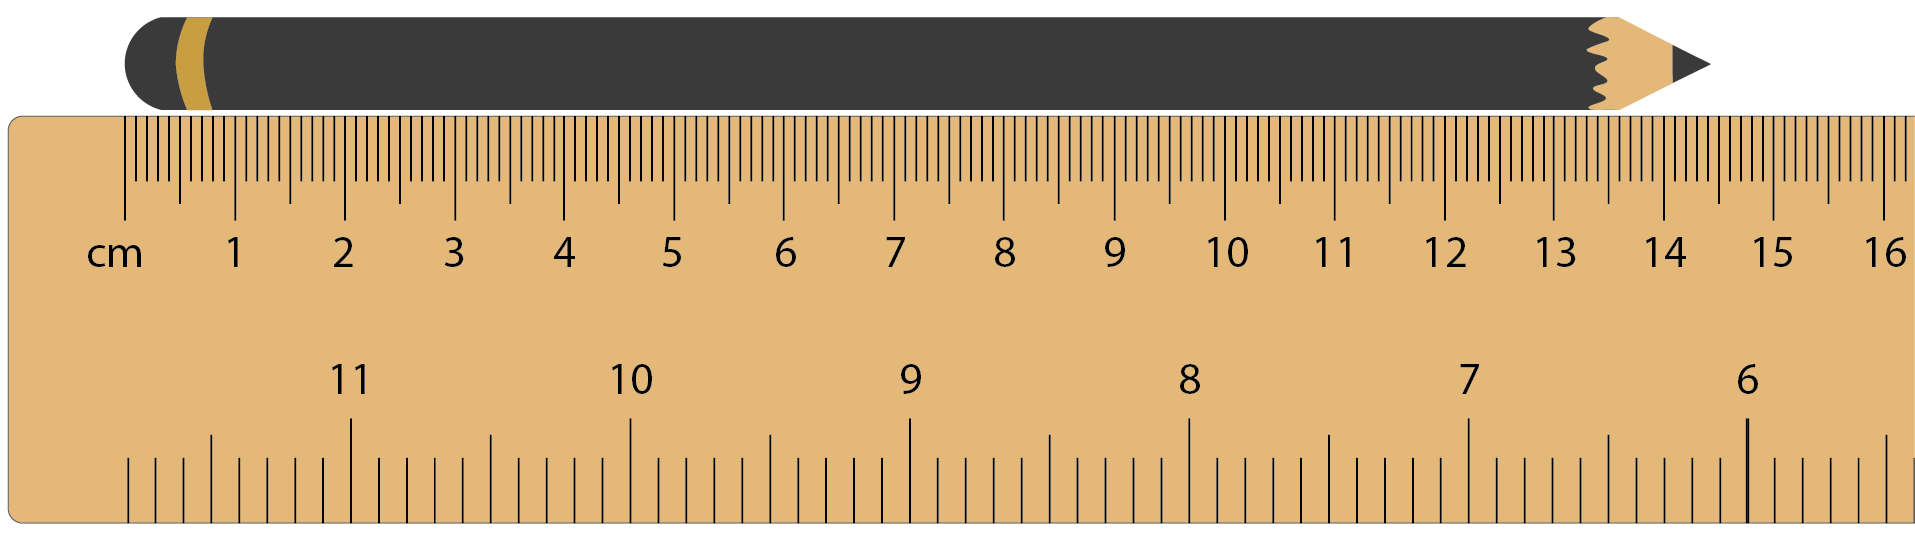 Image of a pencil aligned against a ruler.